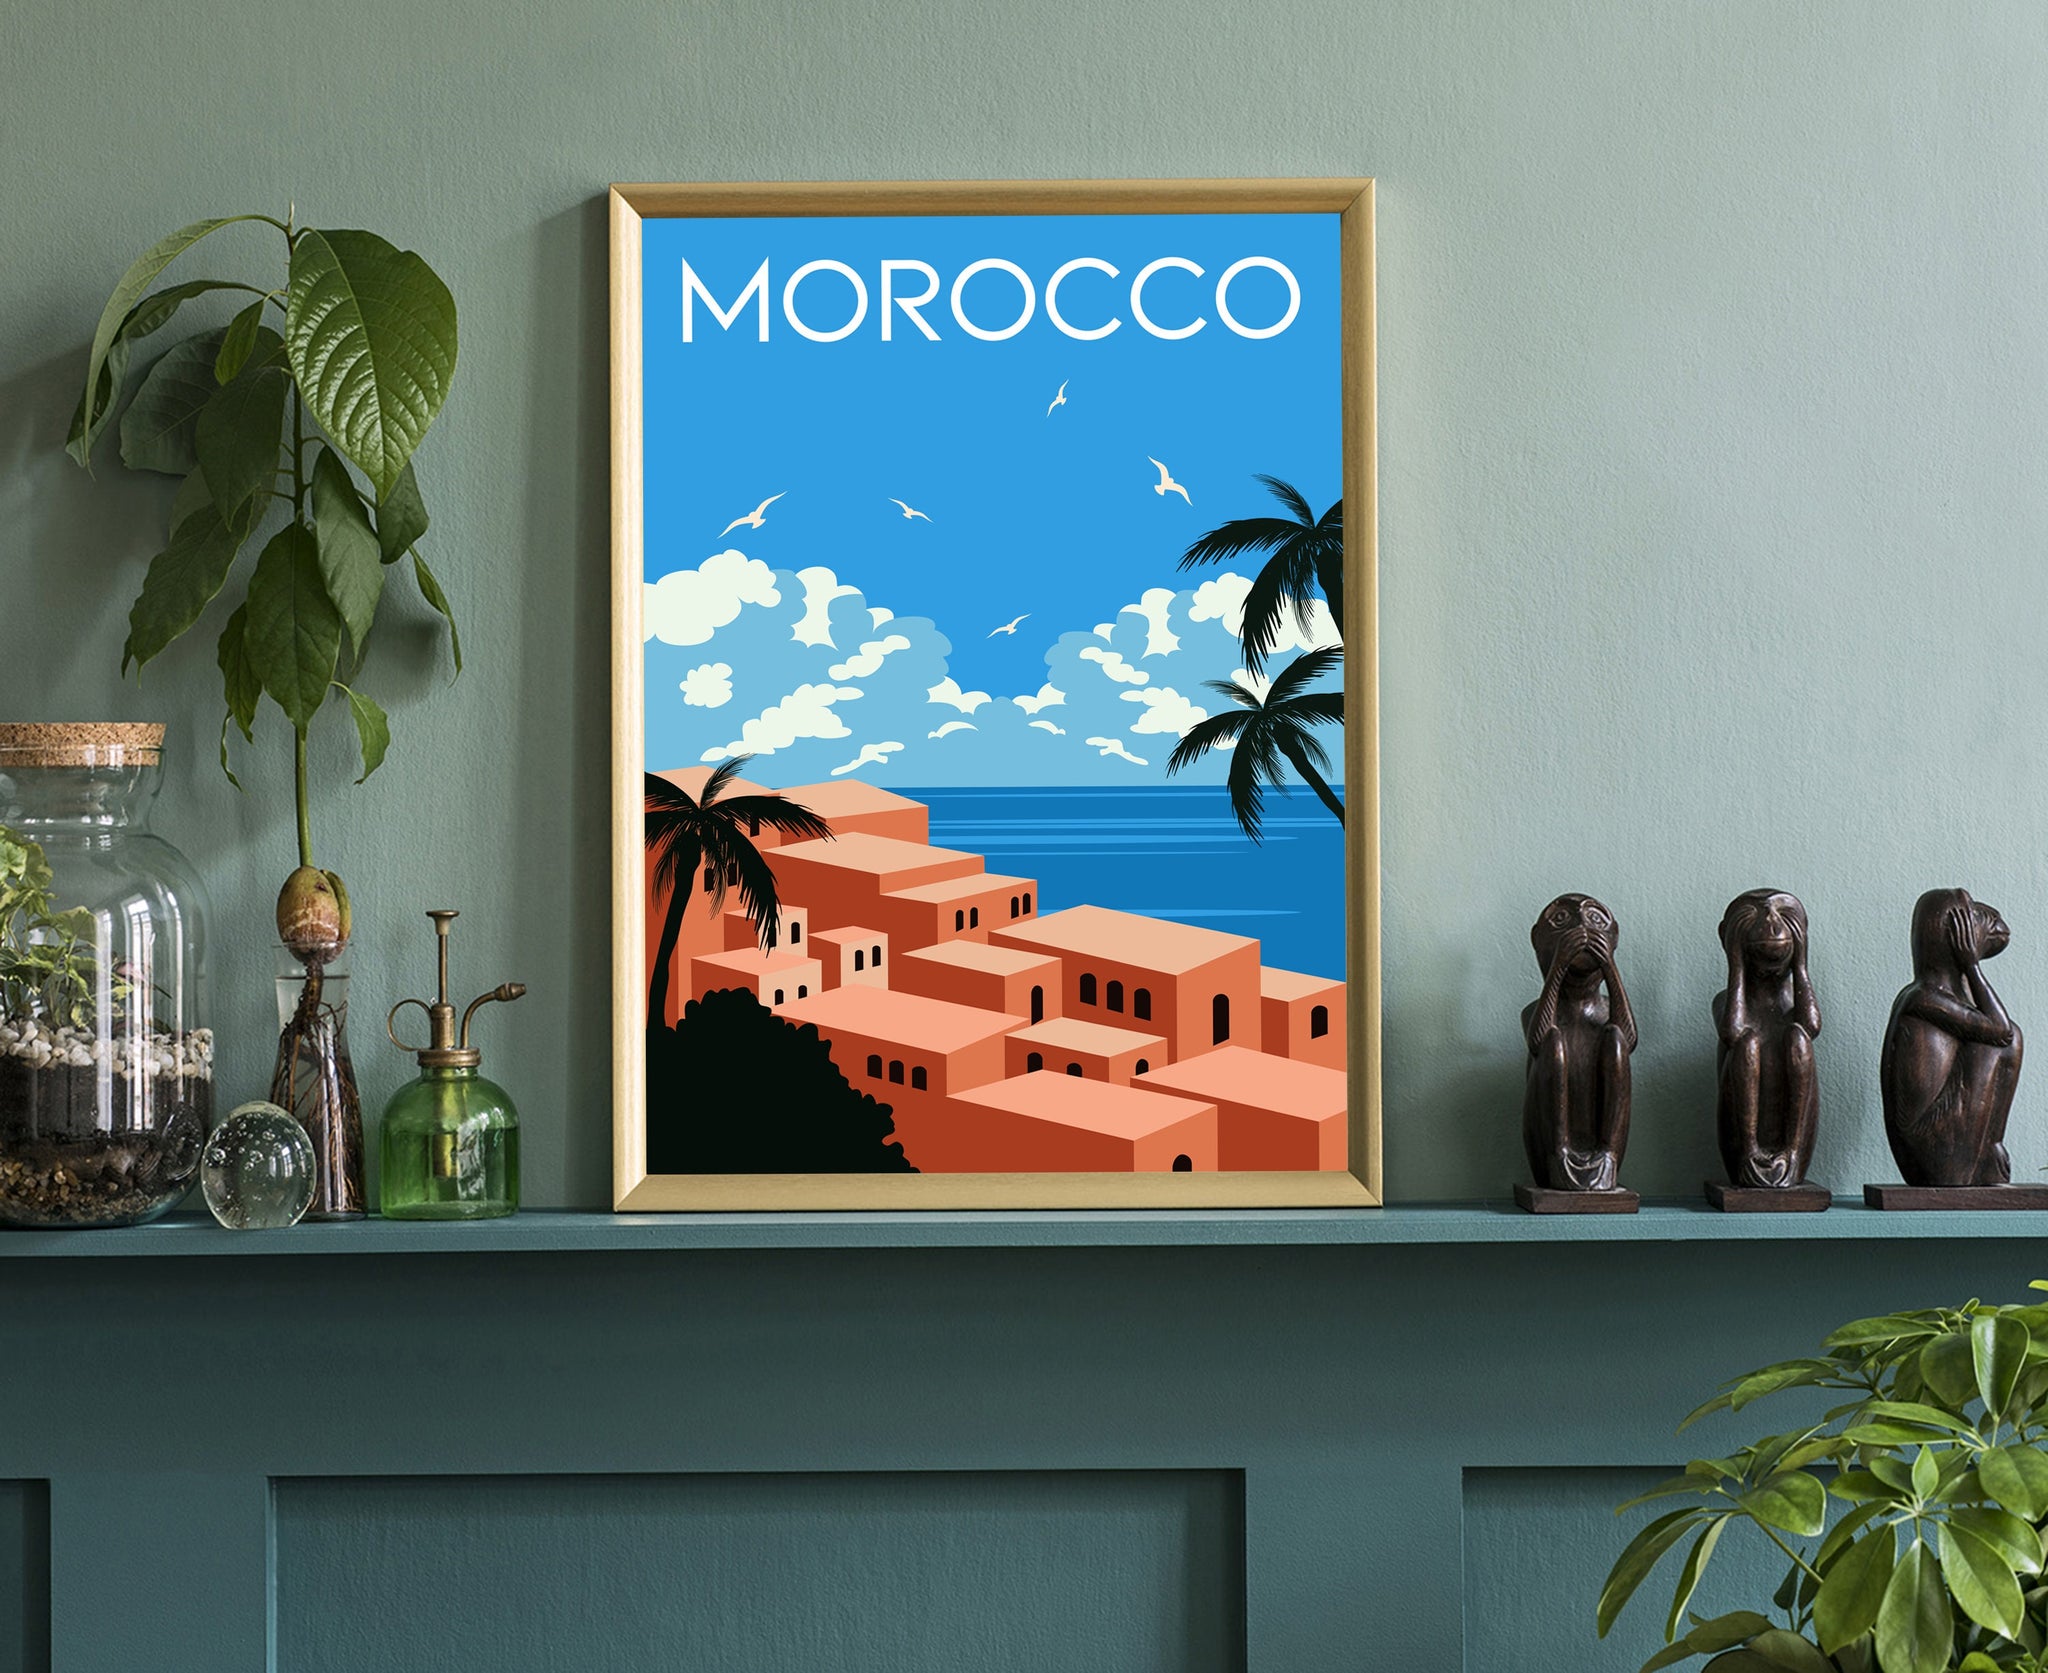 MOROCCO travel poster, Morocco cityscape and landmark poster wall art, Home wall art poster print, Office wall decoration, Vintage posters